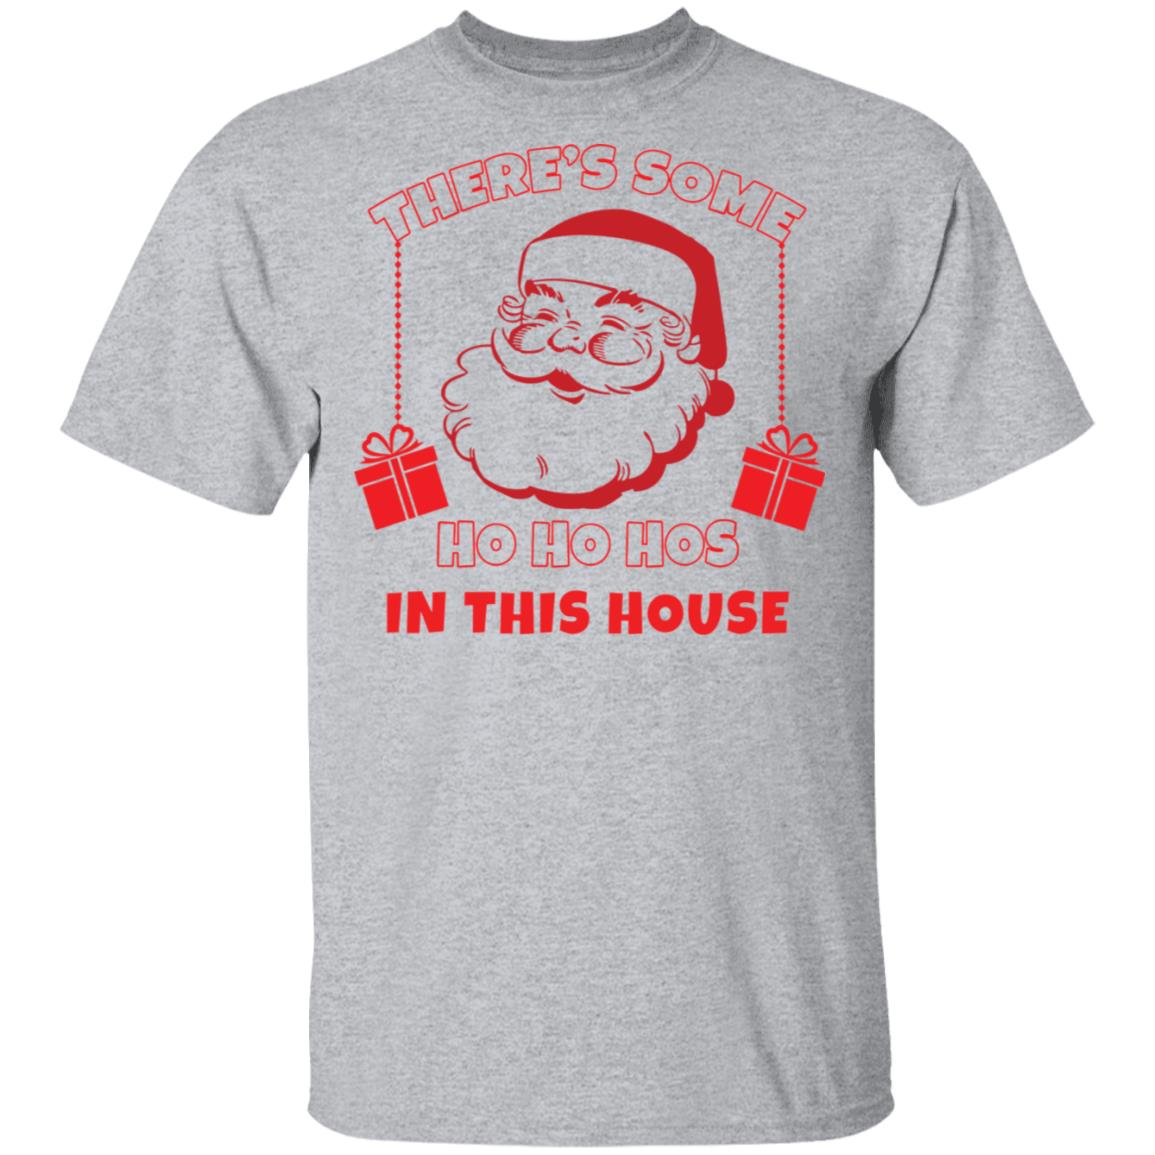 There's some ho ho hos in this house Christmas sweater, t-shirt, hoodie, ladies tee, sweatshirt